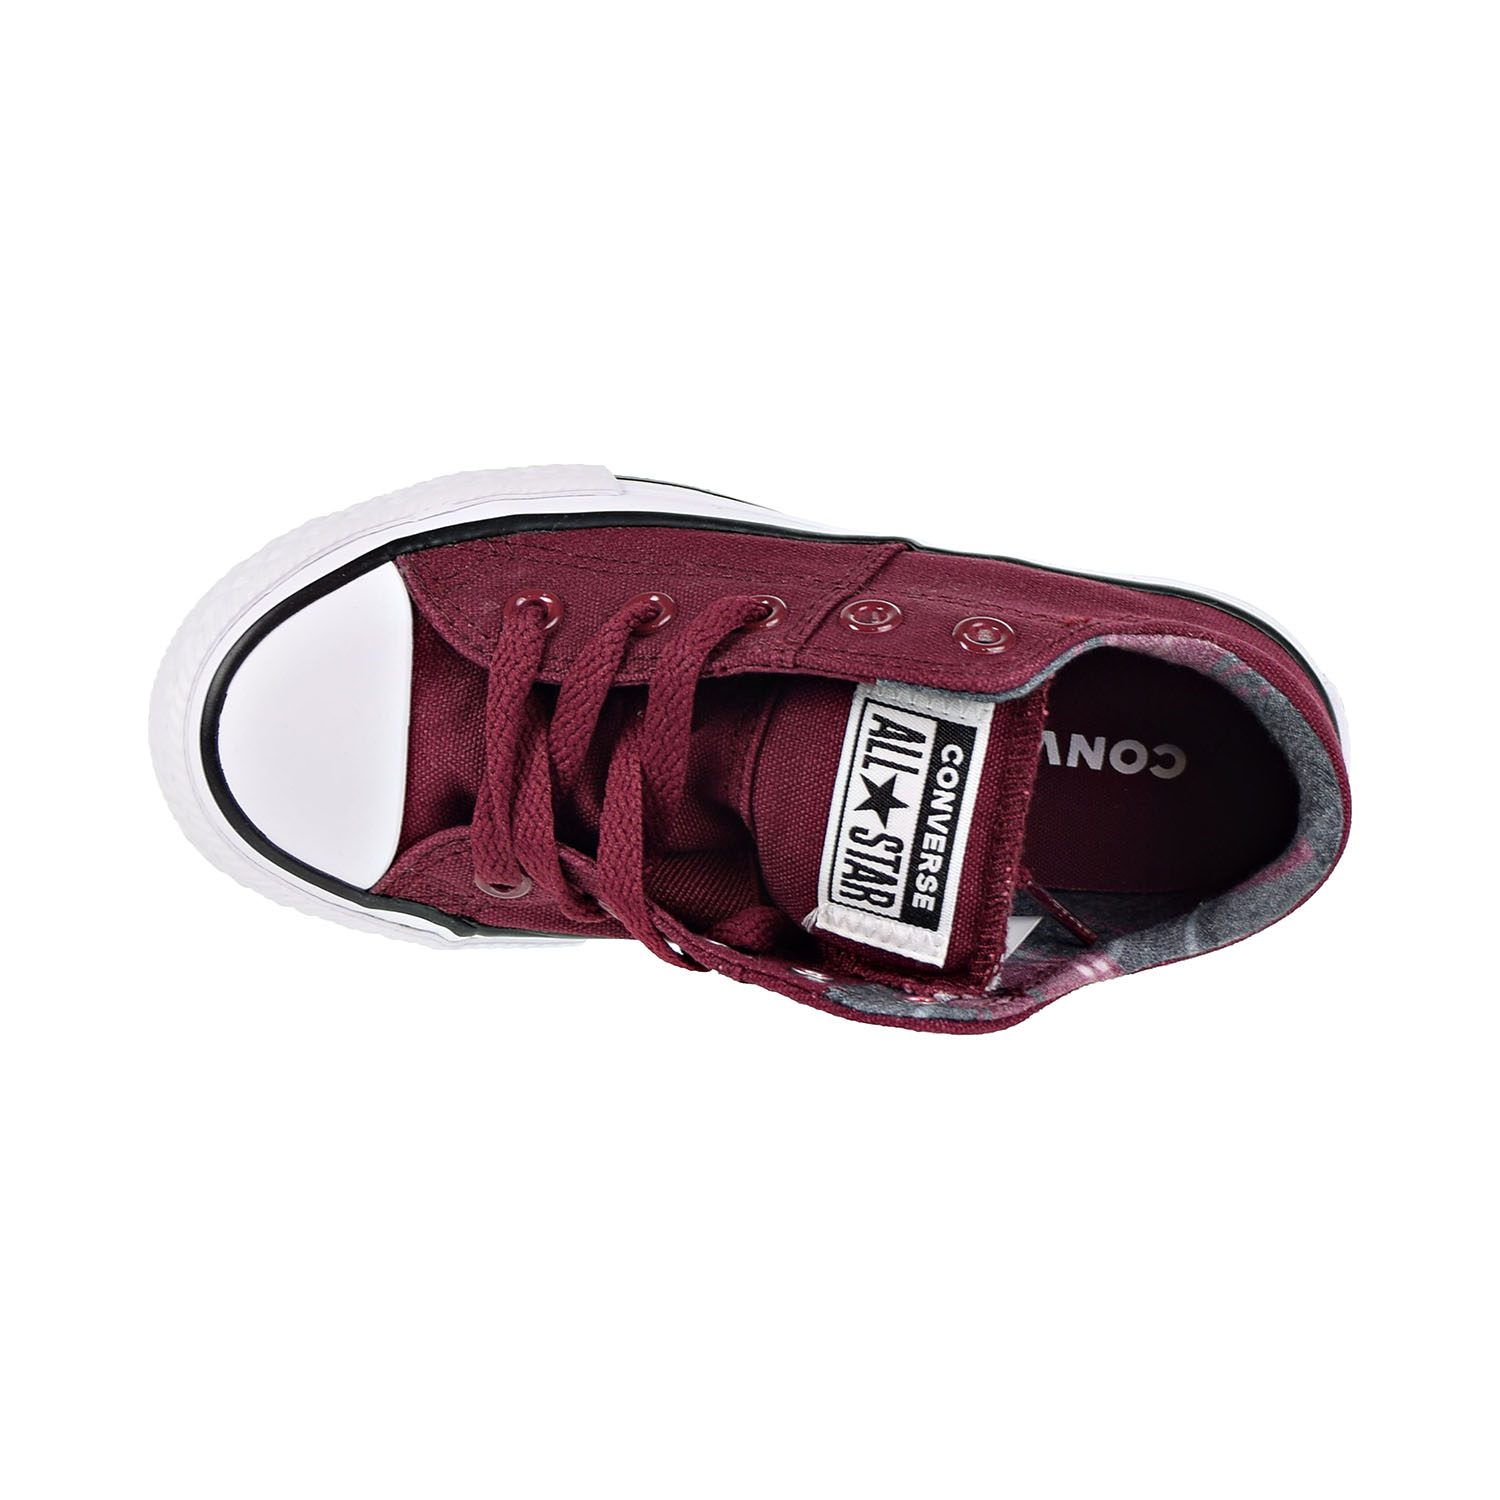 Converse Chuck Taylor All Star Madison Ox Little Kids/Big Kids Shoes Burgundy 661912f - image 5 of 6